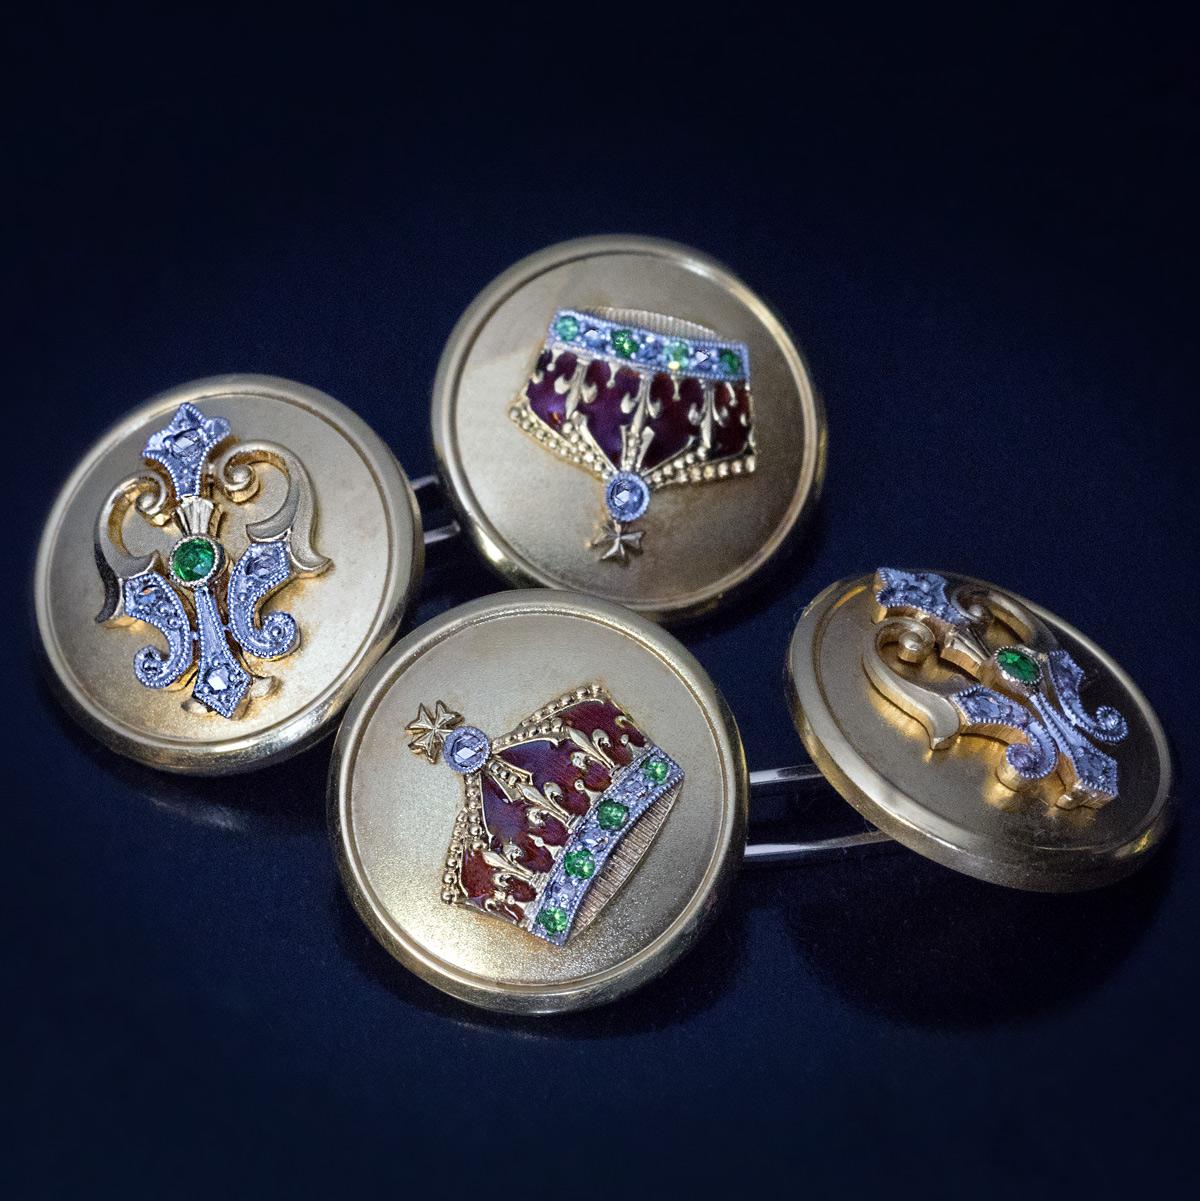 Circa 1908

A pair of royal presentation cufflinks is crafted in platinum and matte 14K yellow gold. The cufflinks are decorated with royal red enamel crown and cipher of king Ferdinand I (Cyrillic letter ‘Ф’) designed in Art Nouveau taste. Both the